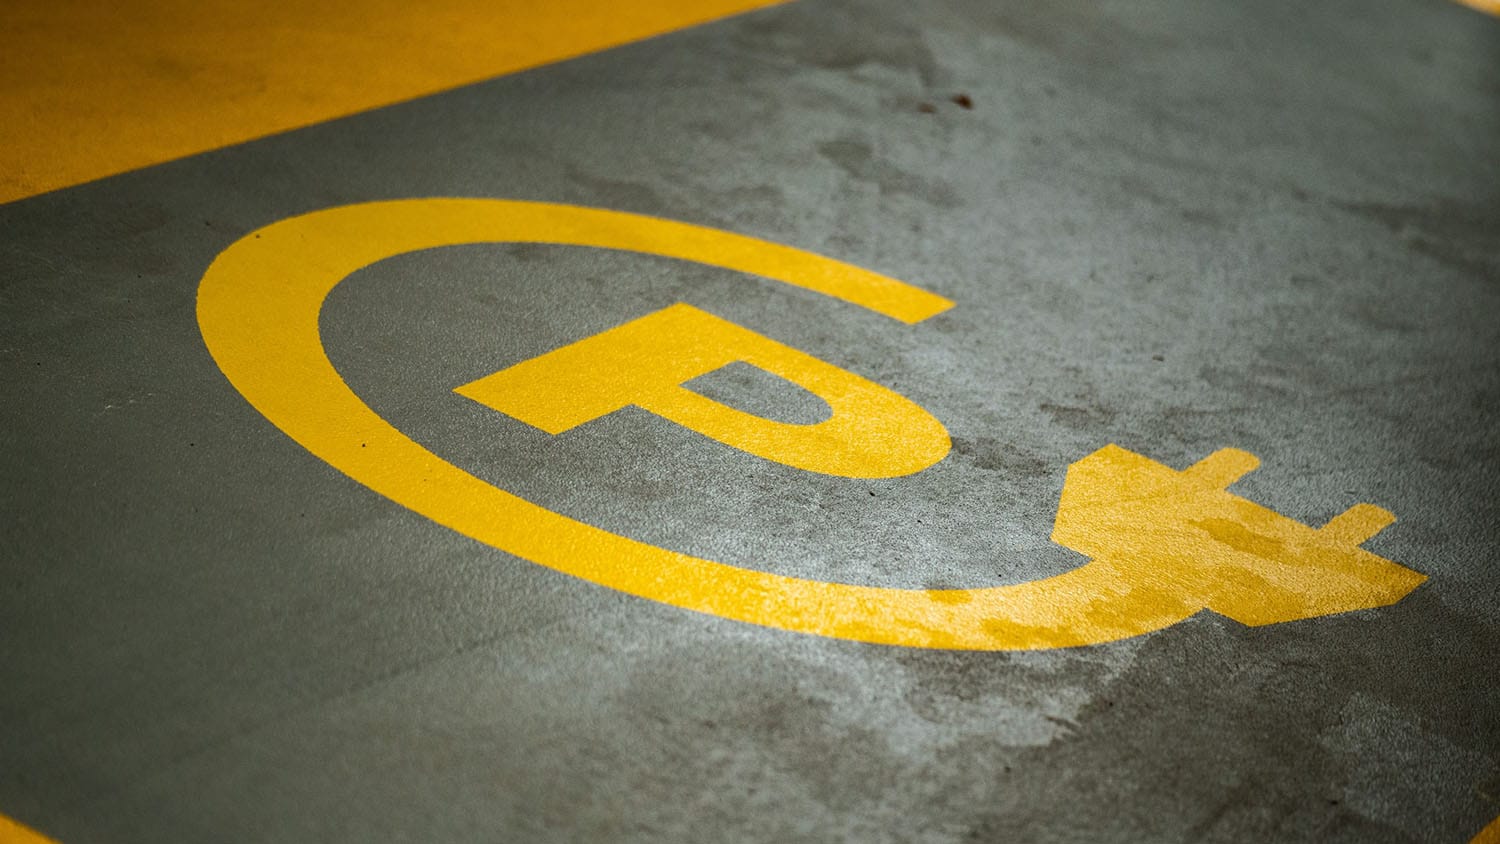 Yellow logo painted on black asphalt showing where to park electric vehicle for charging station.